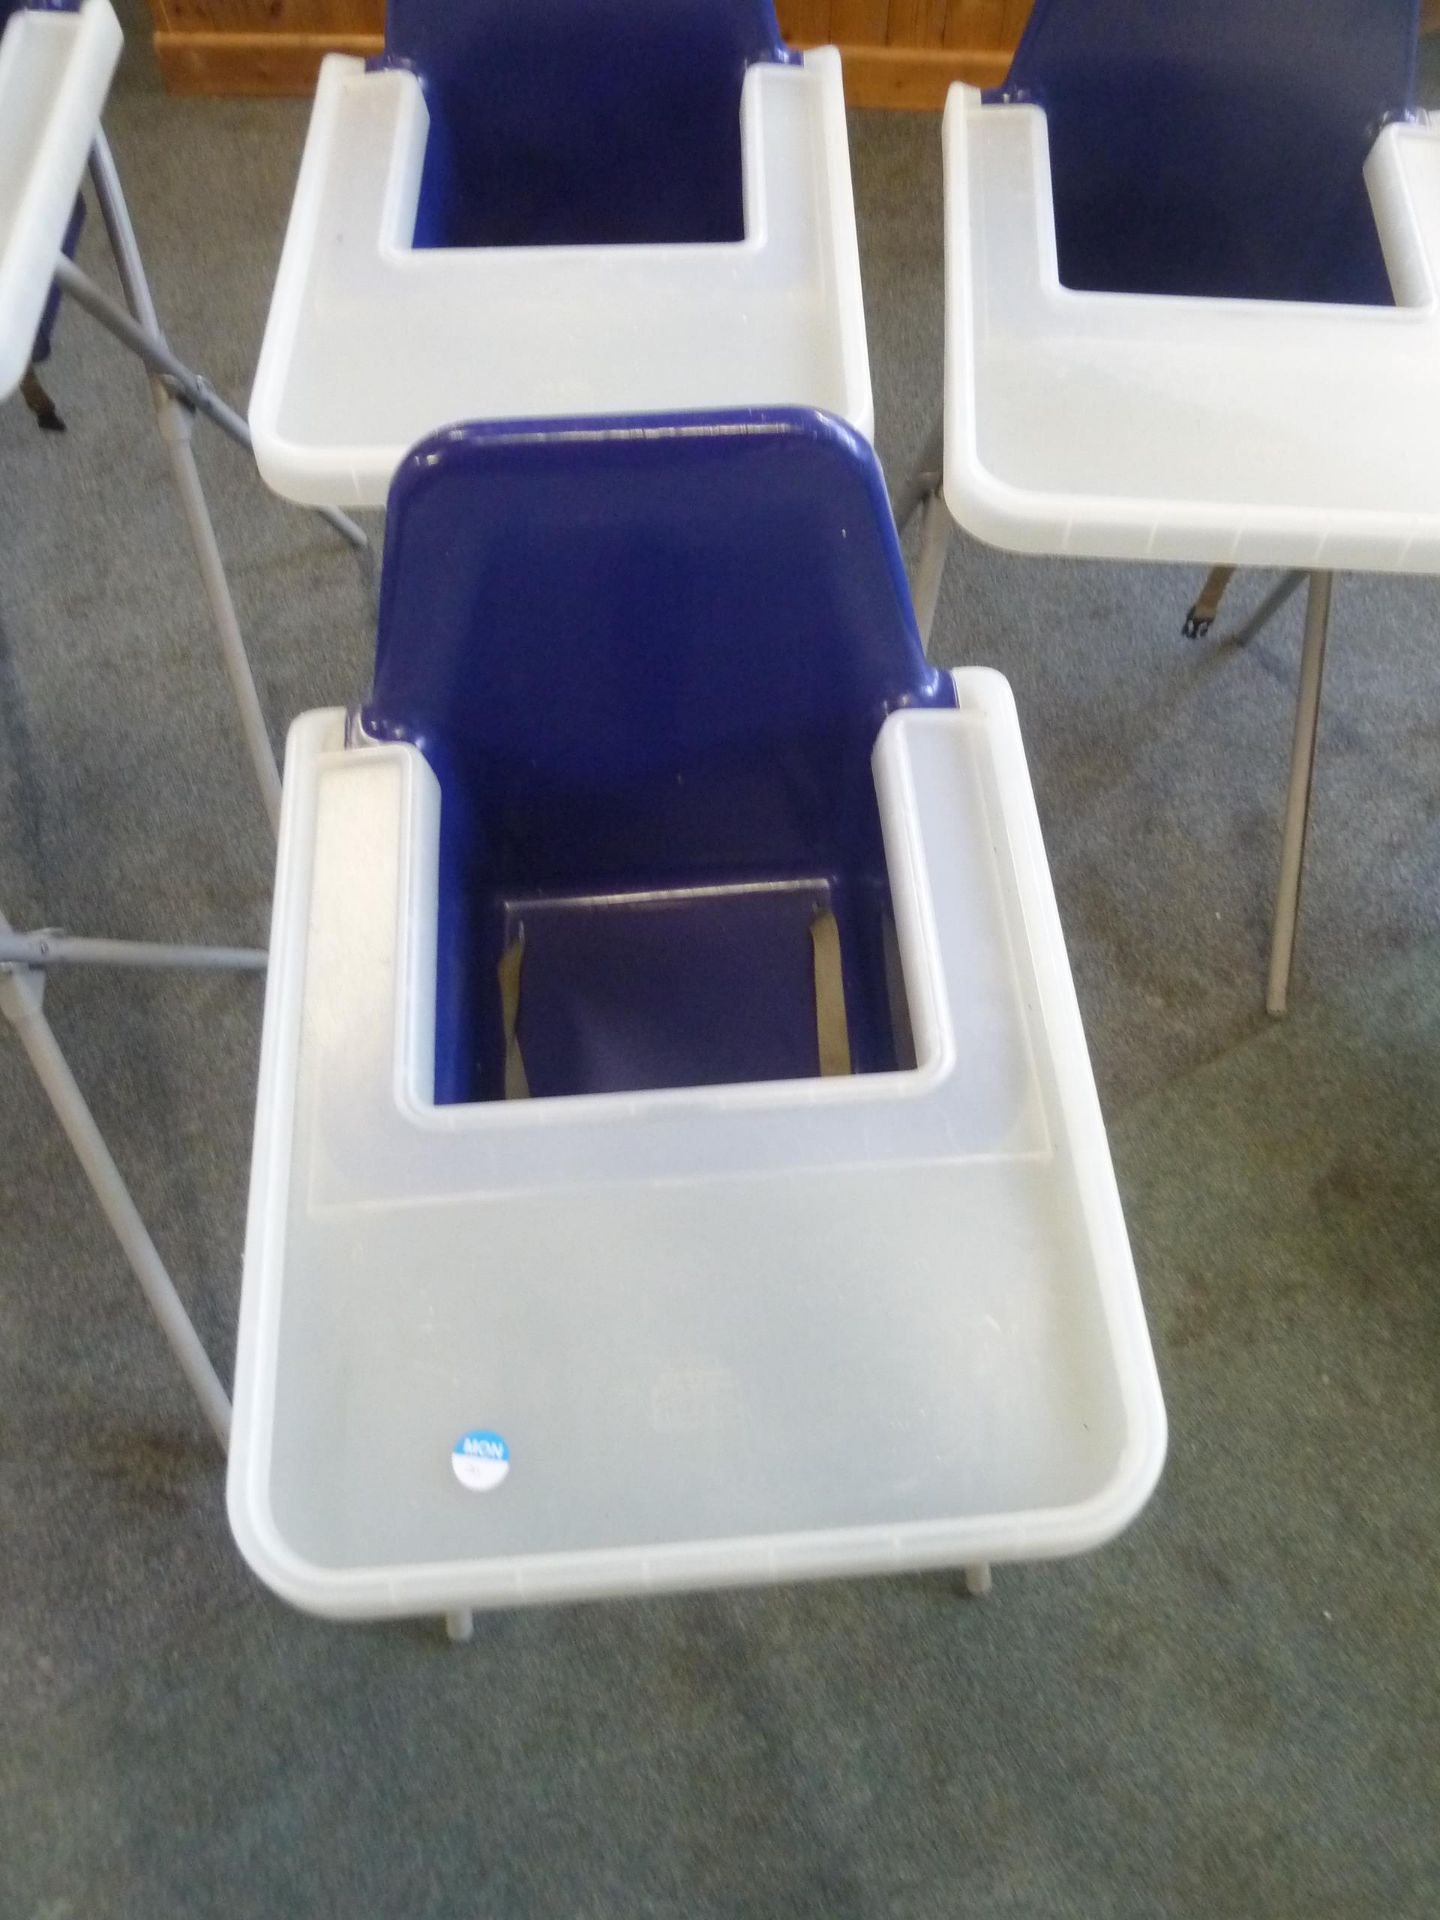 *3 x high chairs - plastic seat and tray with metal x-frame legs